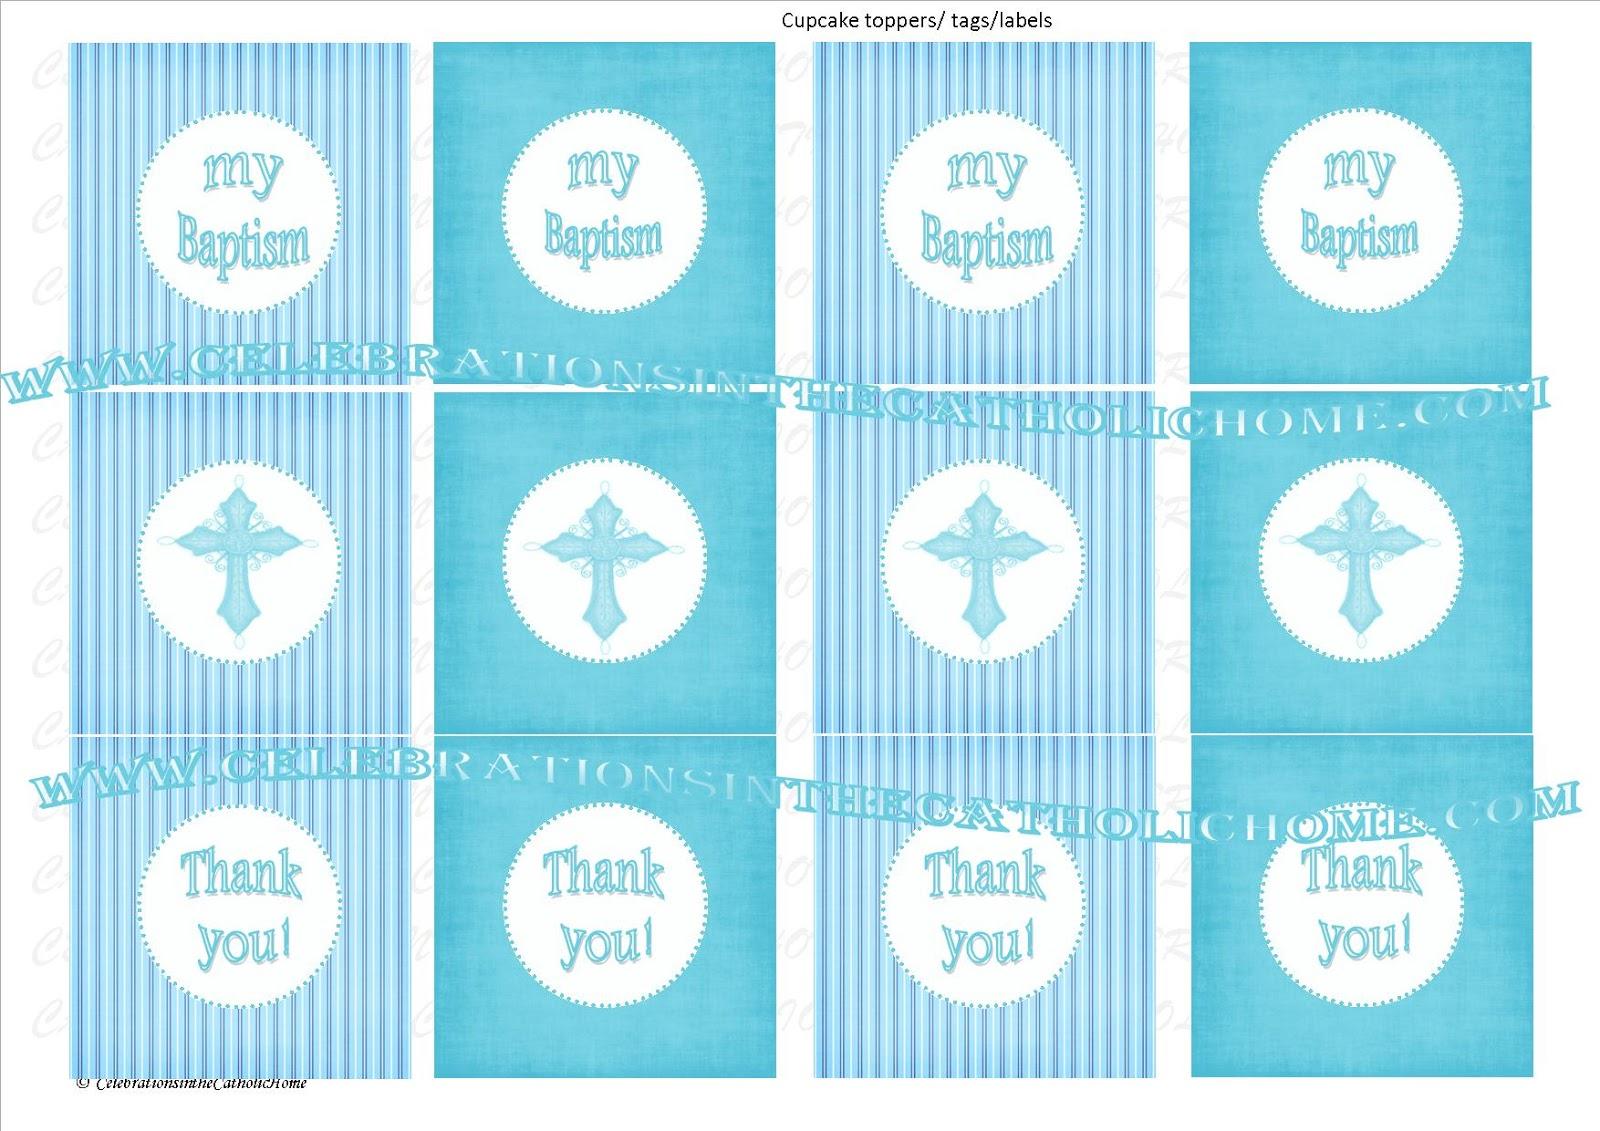 Printable banner for christening. Download them or print